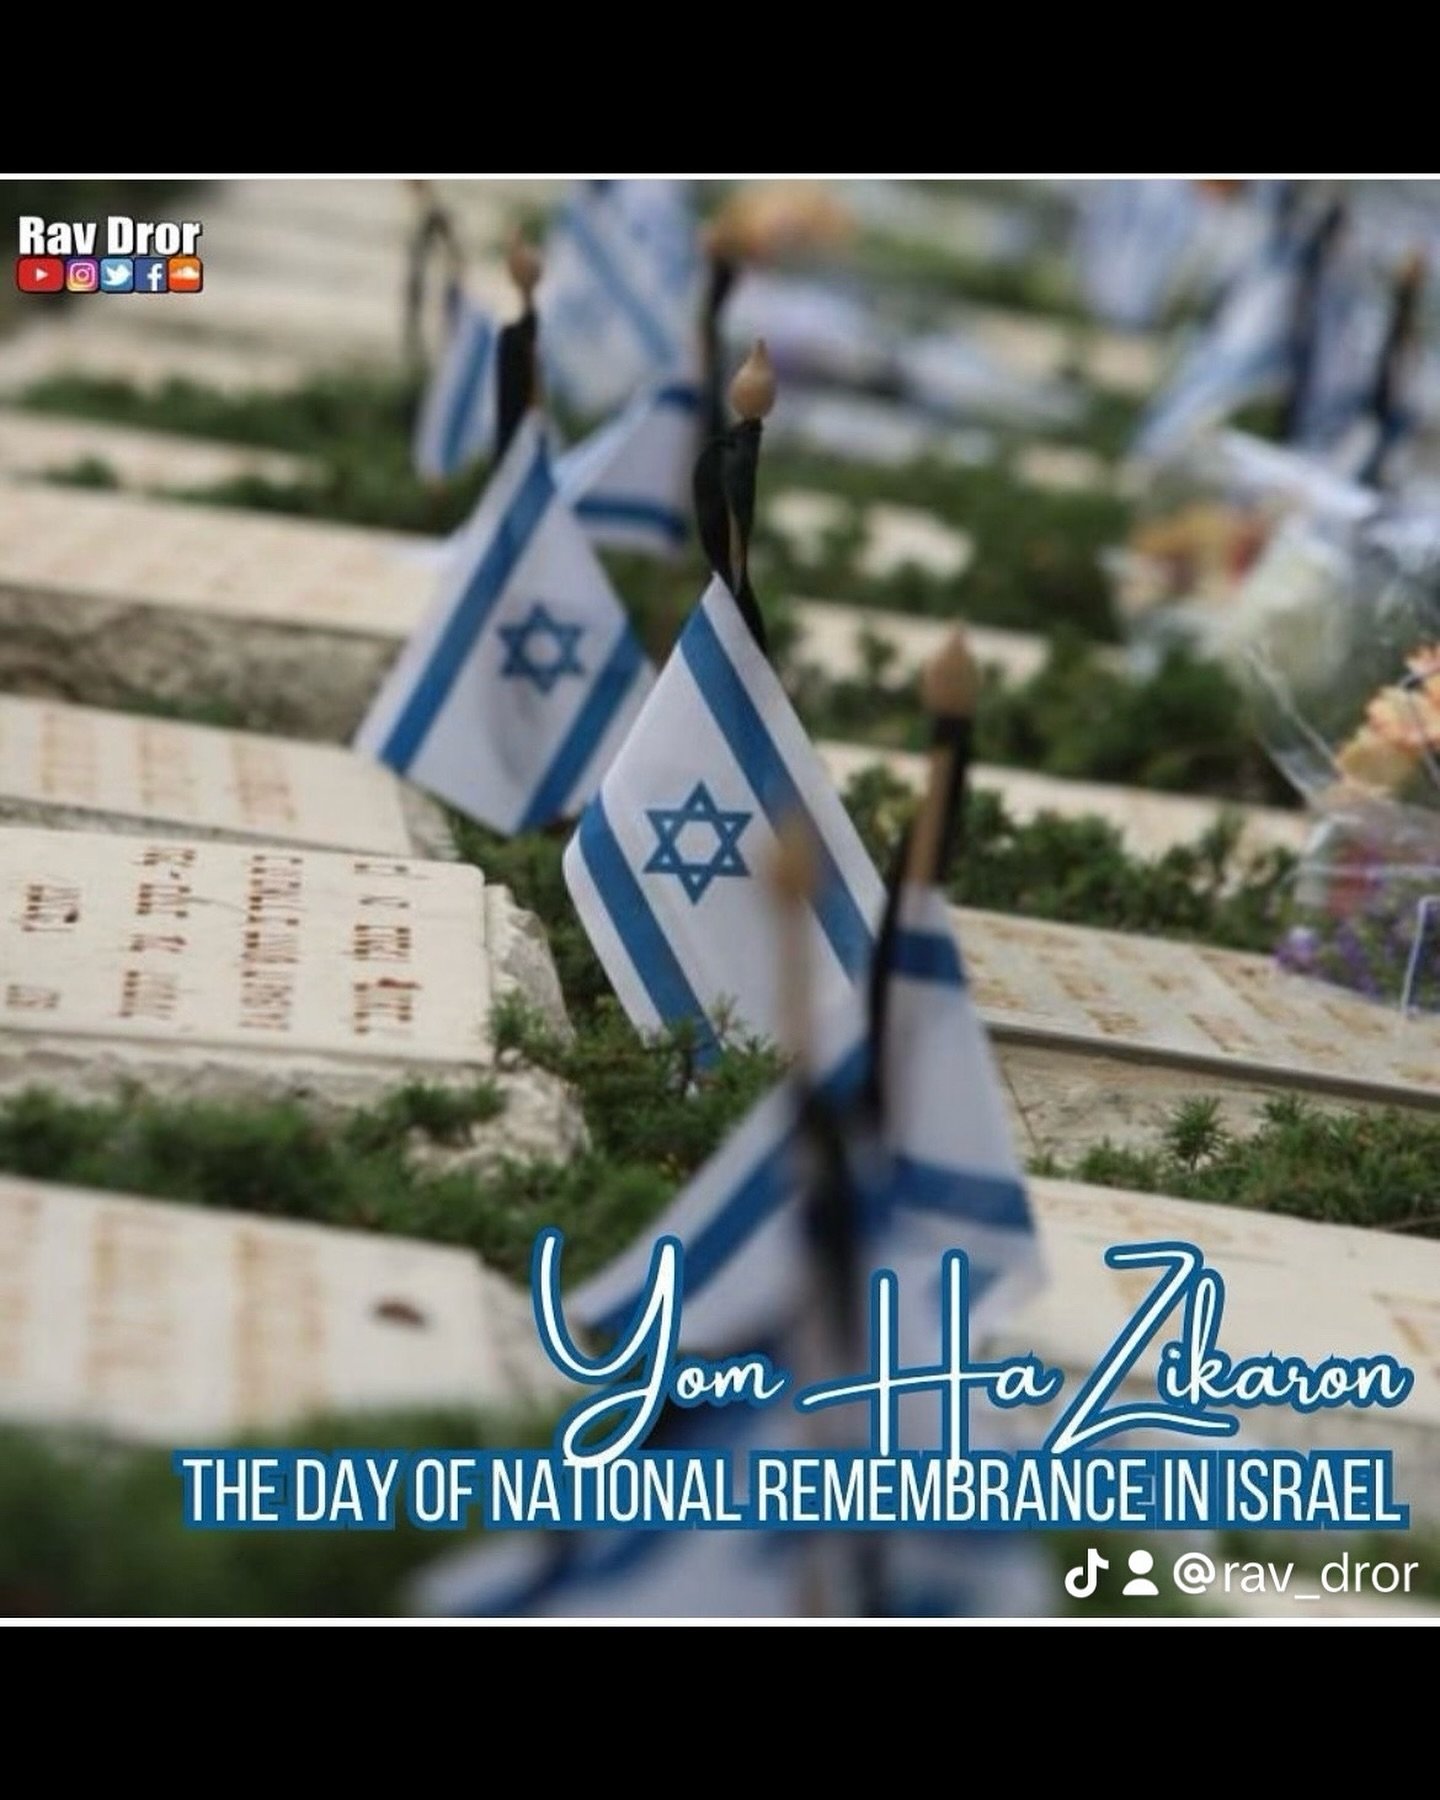 On Yom HaZikaron we remember all the brave people who fell in the wars that took place in the process of establishing the state of Israel, and all those killed by terrorist attacks in Israel and around the world. Especially this year, as we lost hund